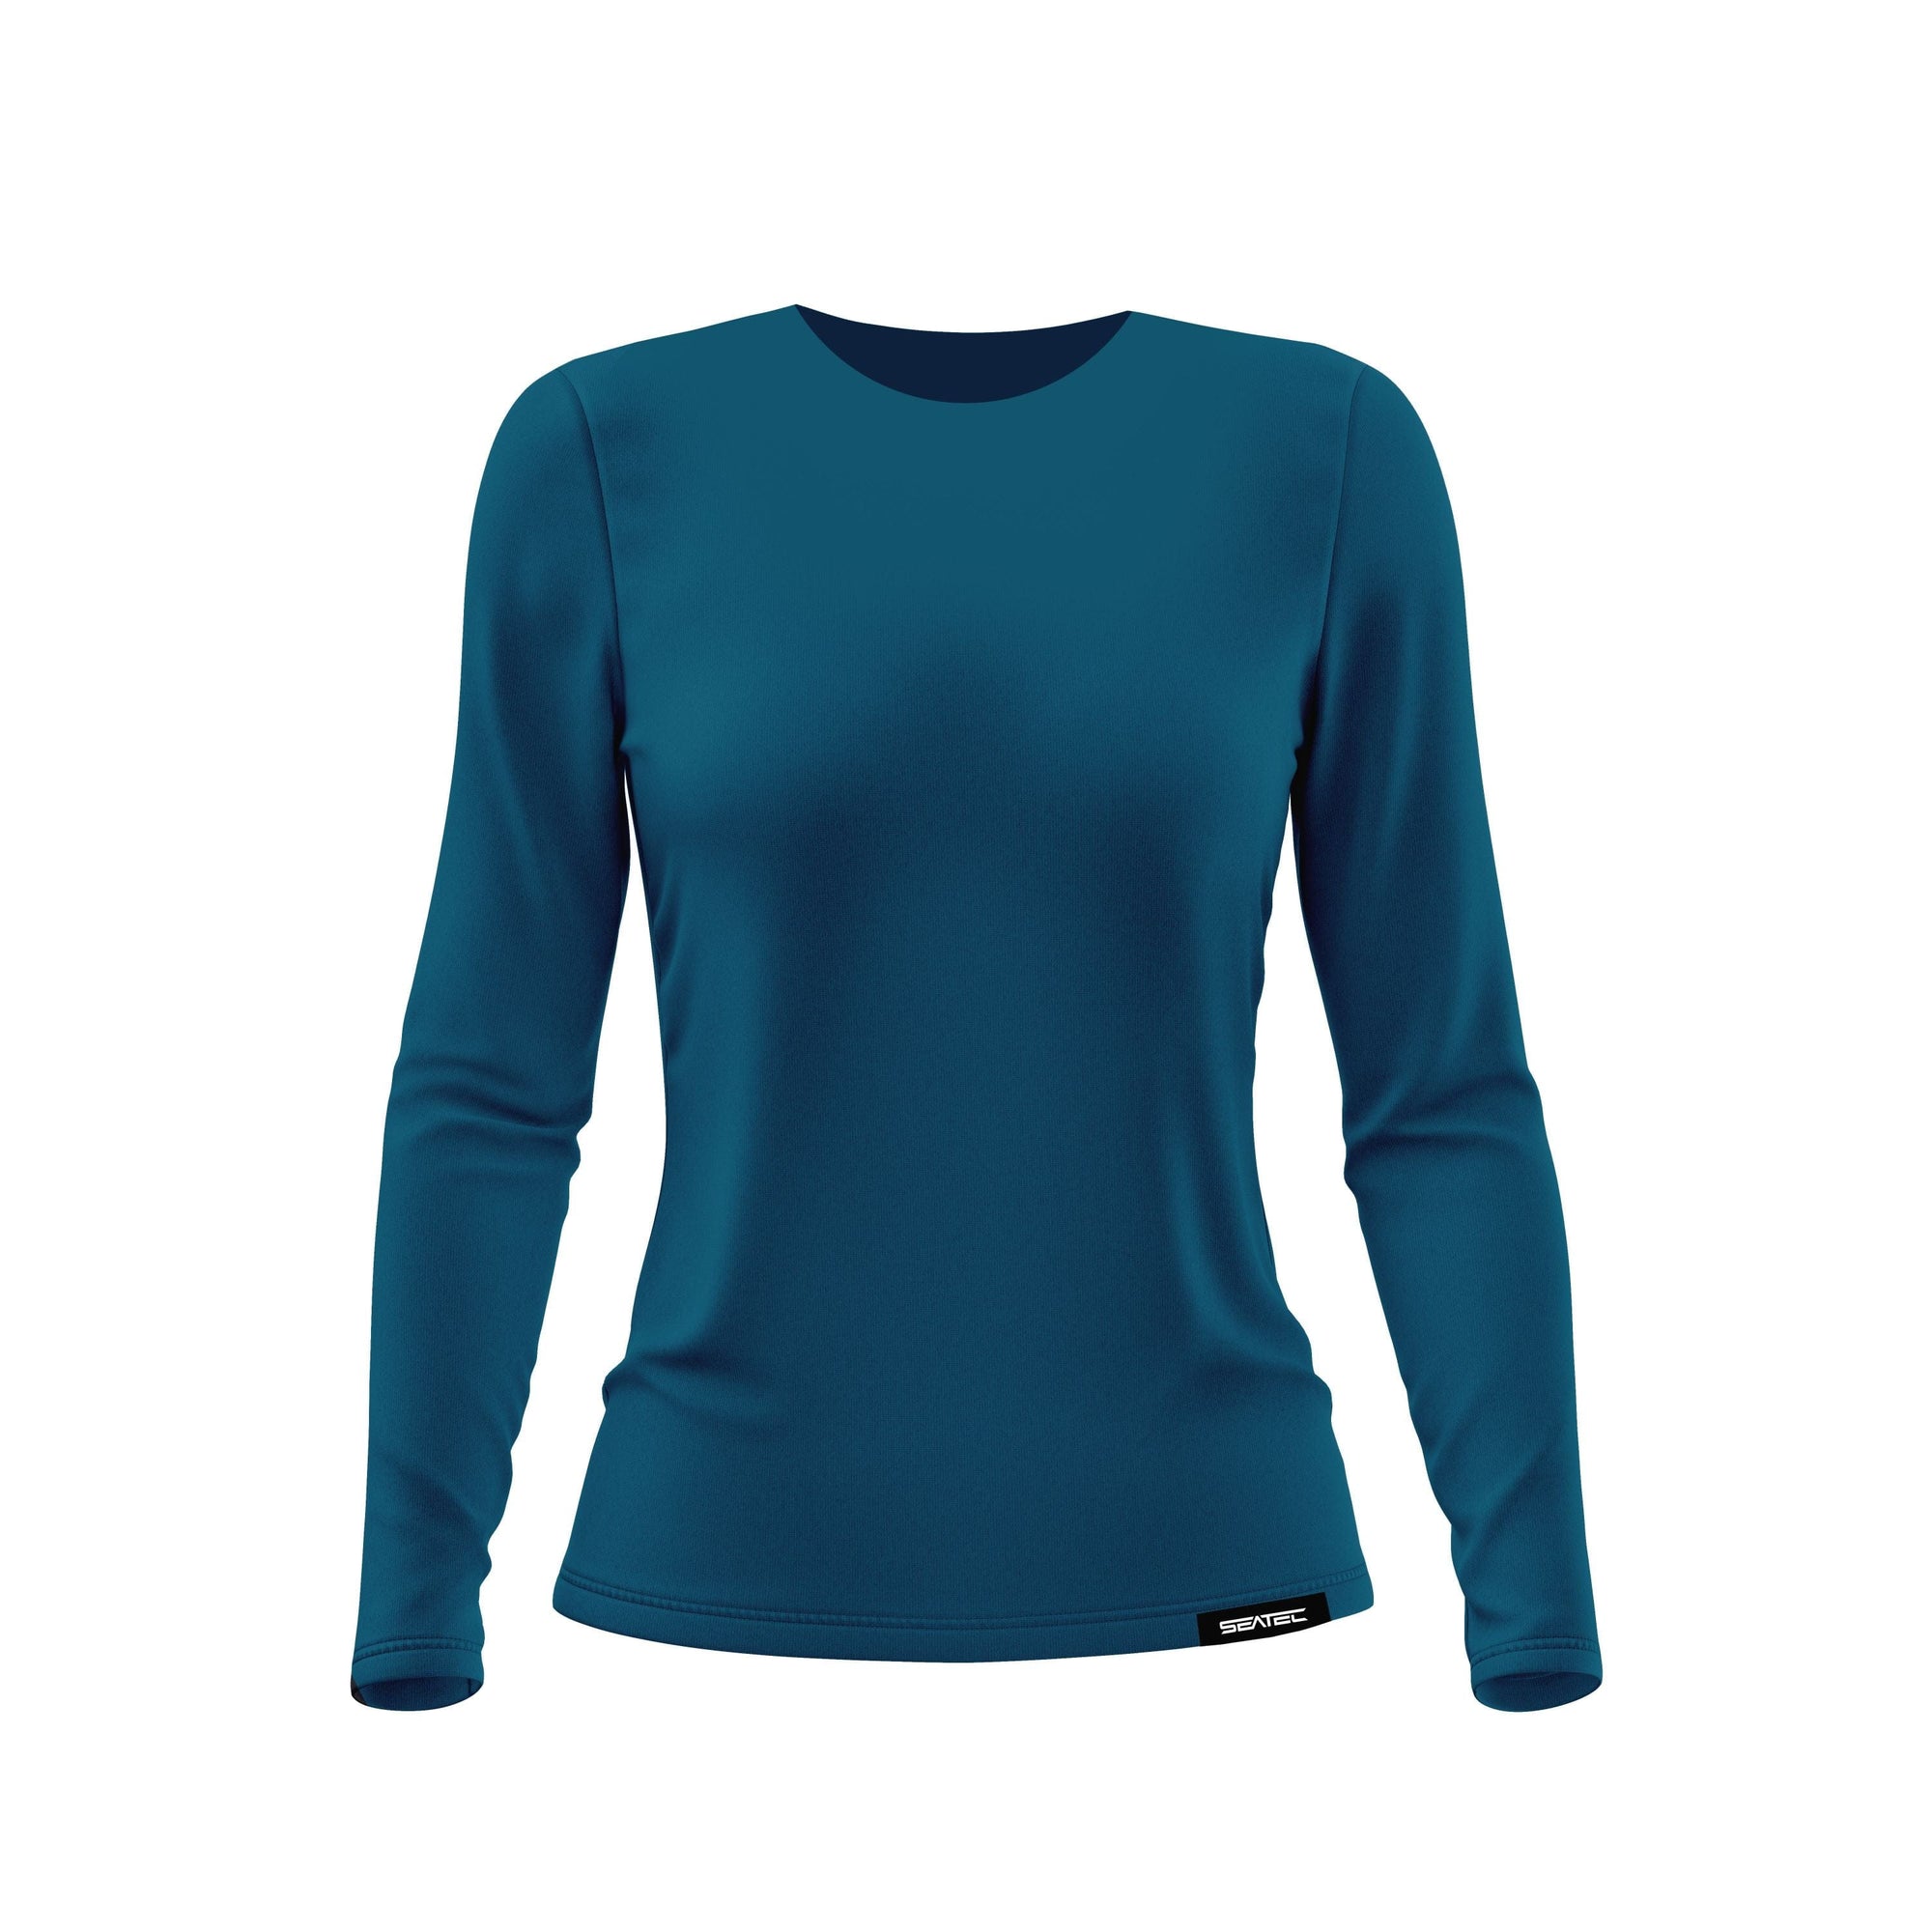 Seatec Outfitters Womens WOMEN'S ACTIVE | DEEP WATER | LS CREW